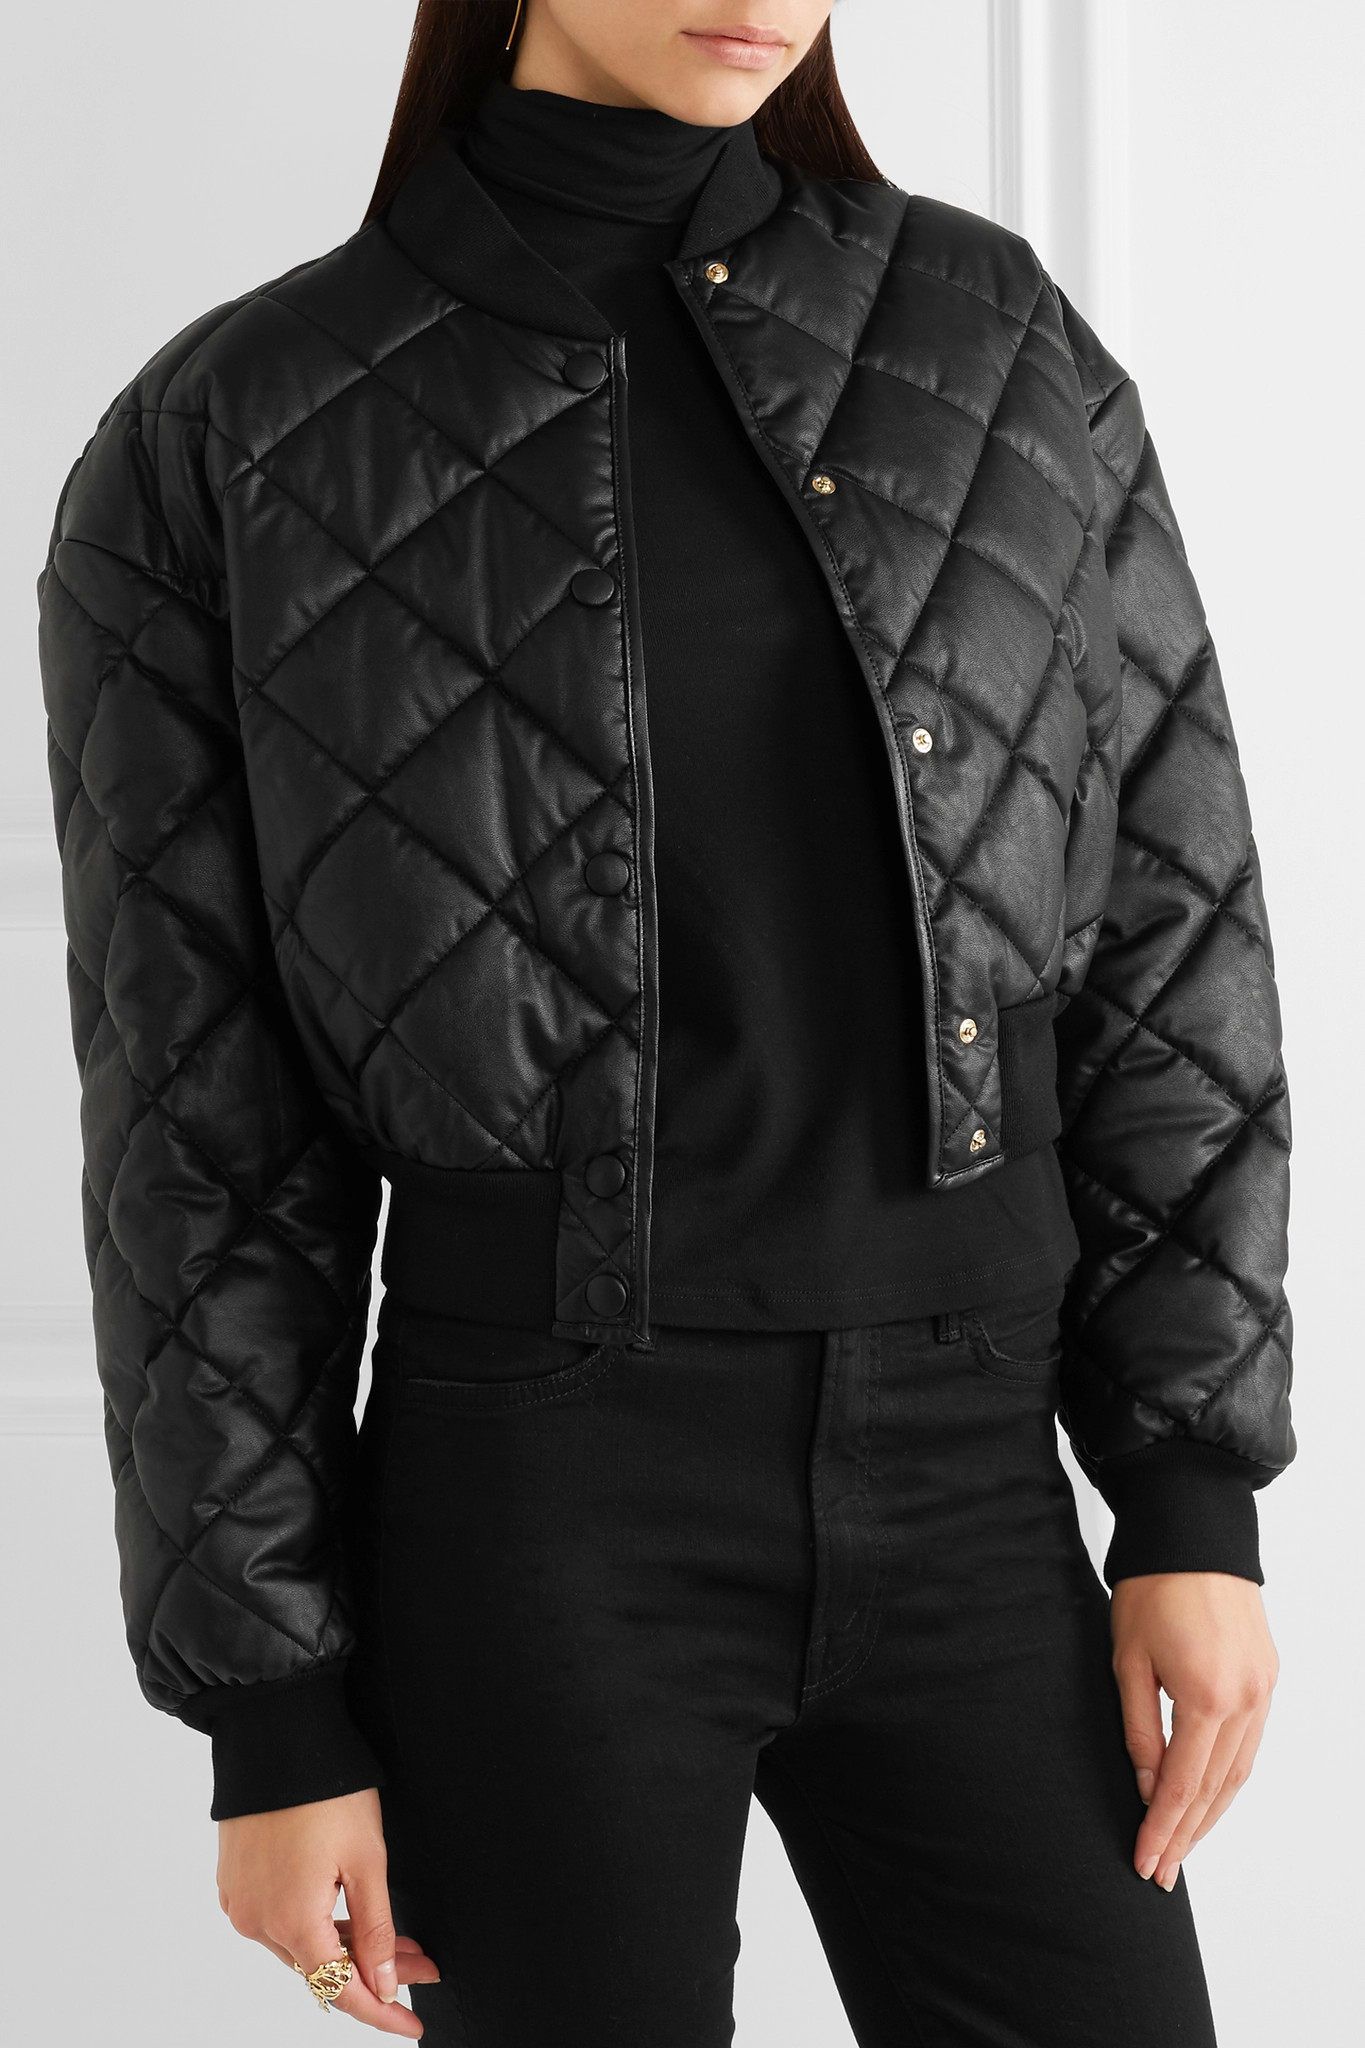 Stella mccartney Marisa Cropped Quilted Faux Leather Bomber Jacket in ...